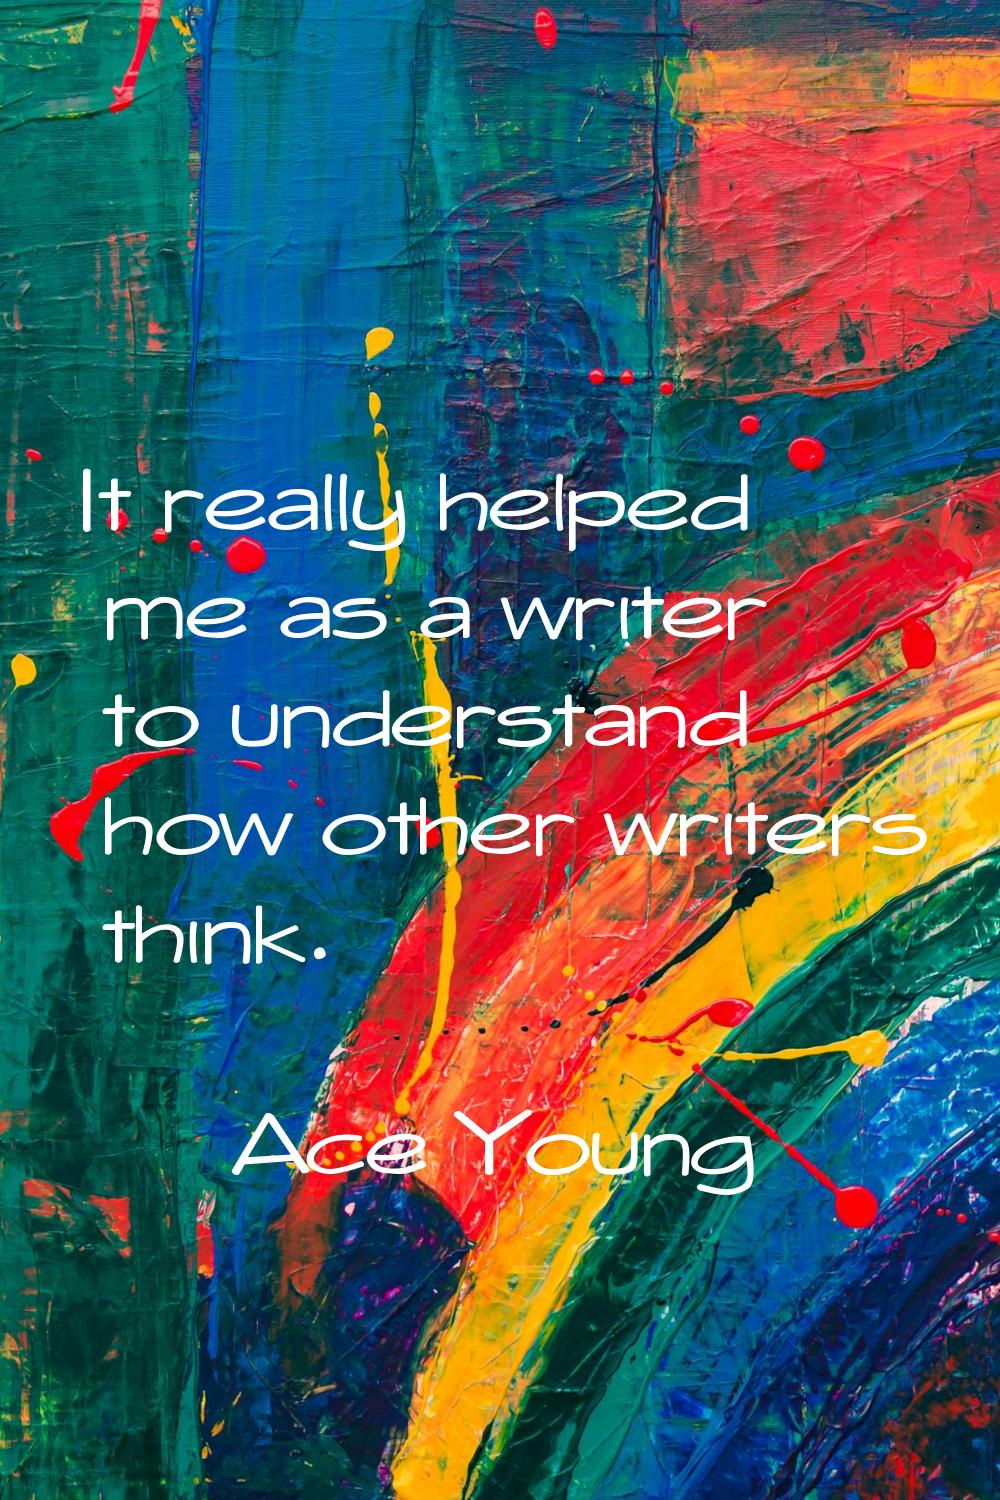 It really helped me as a writer to understand how other writers think.